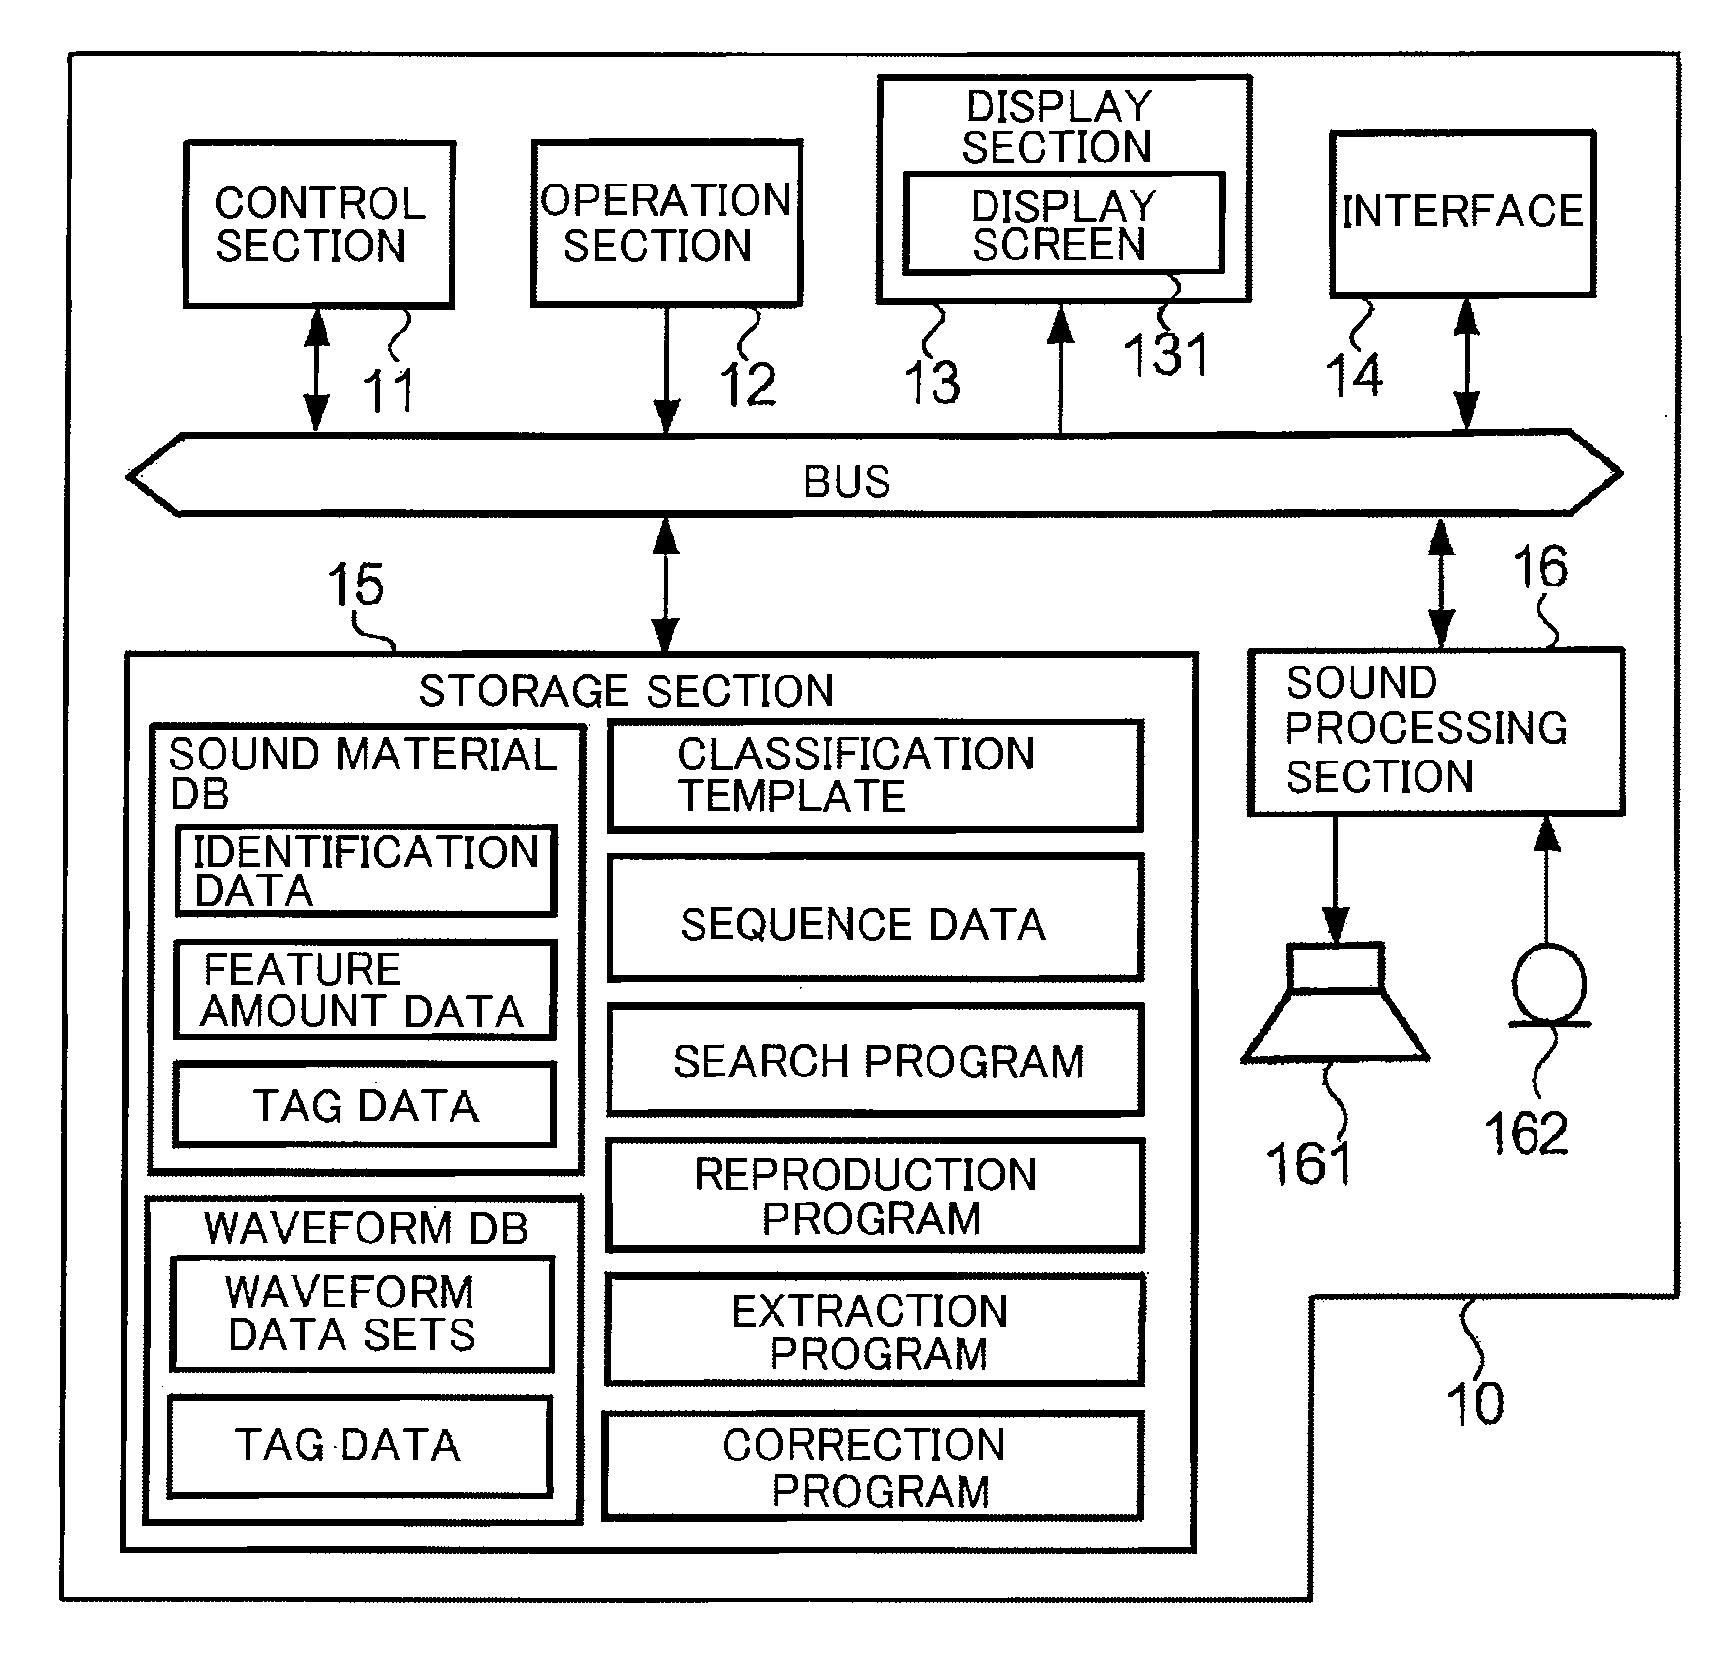 Management of a sound material to be stored into a database